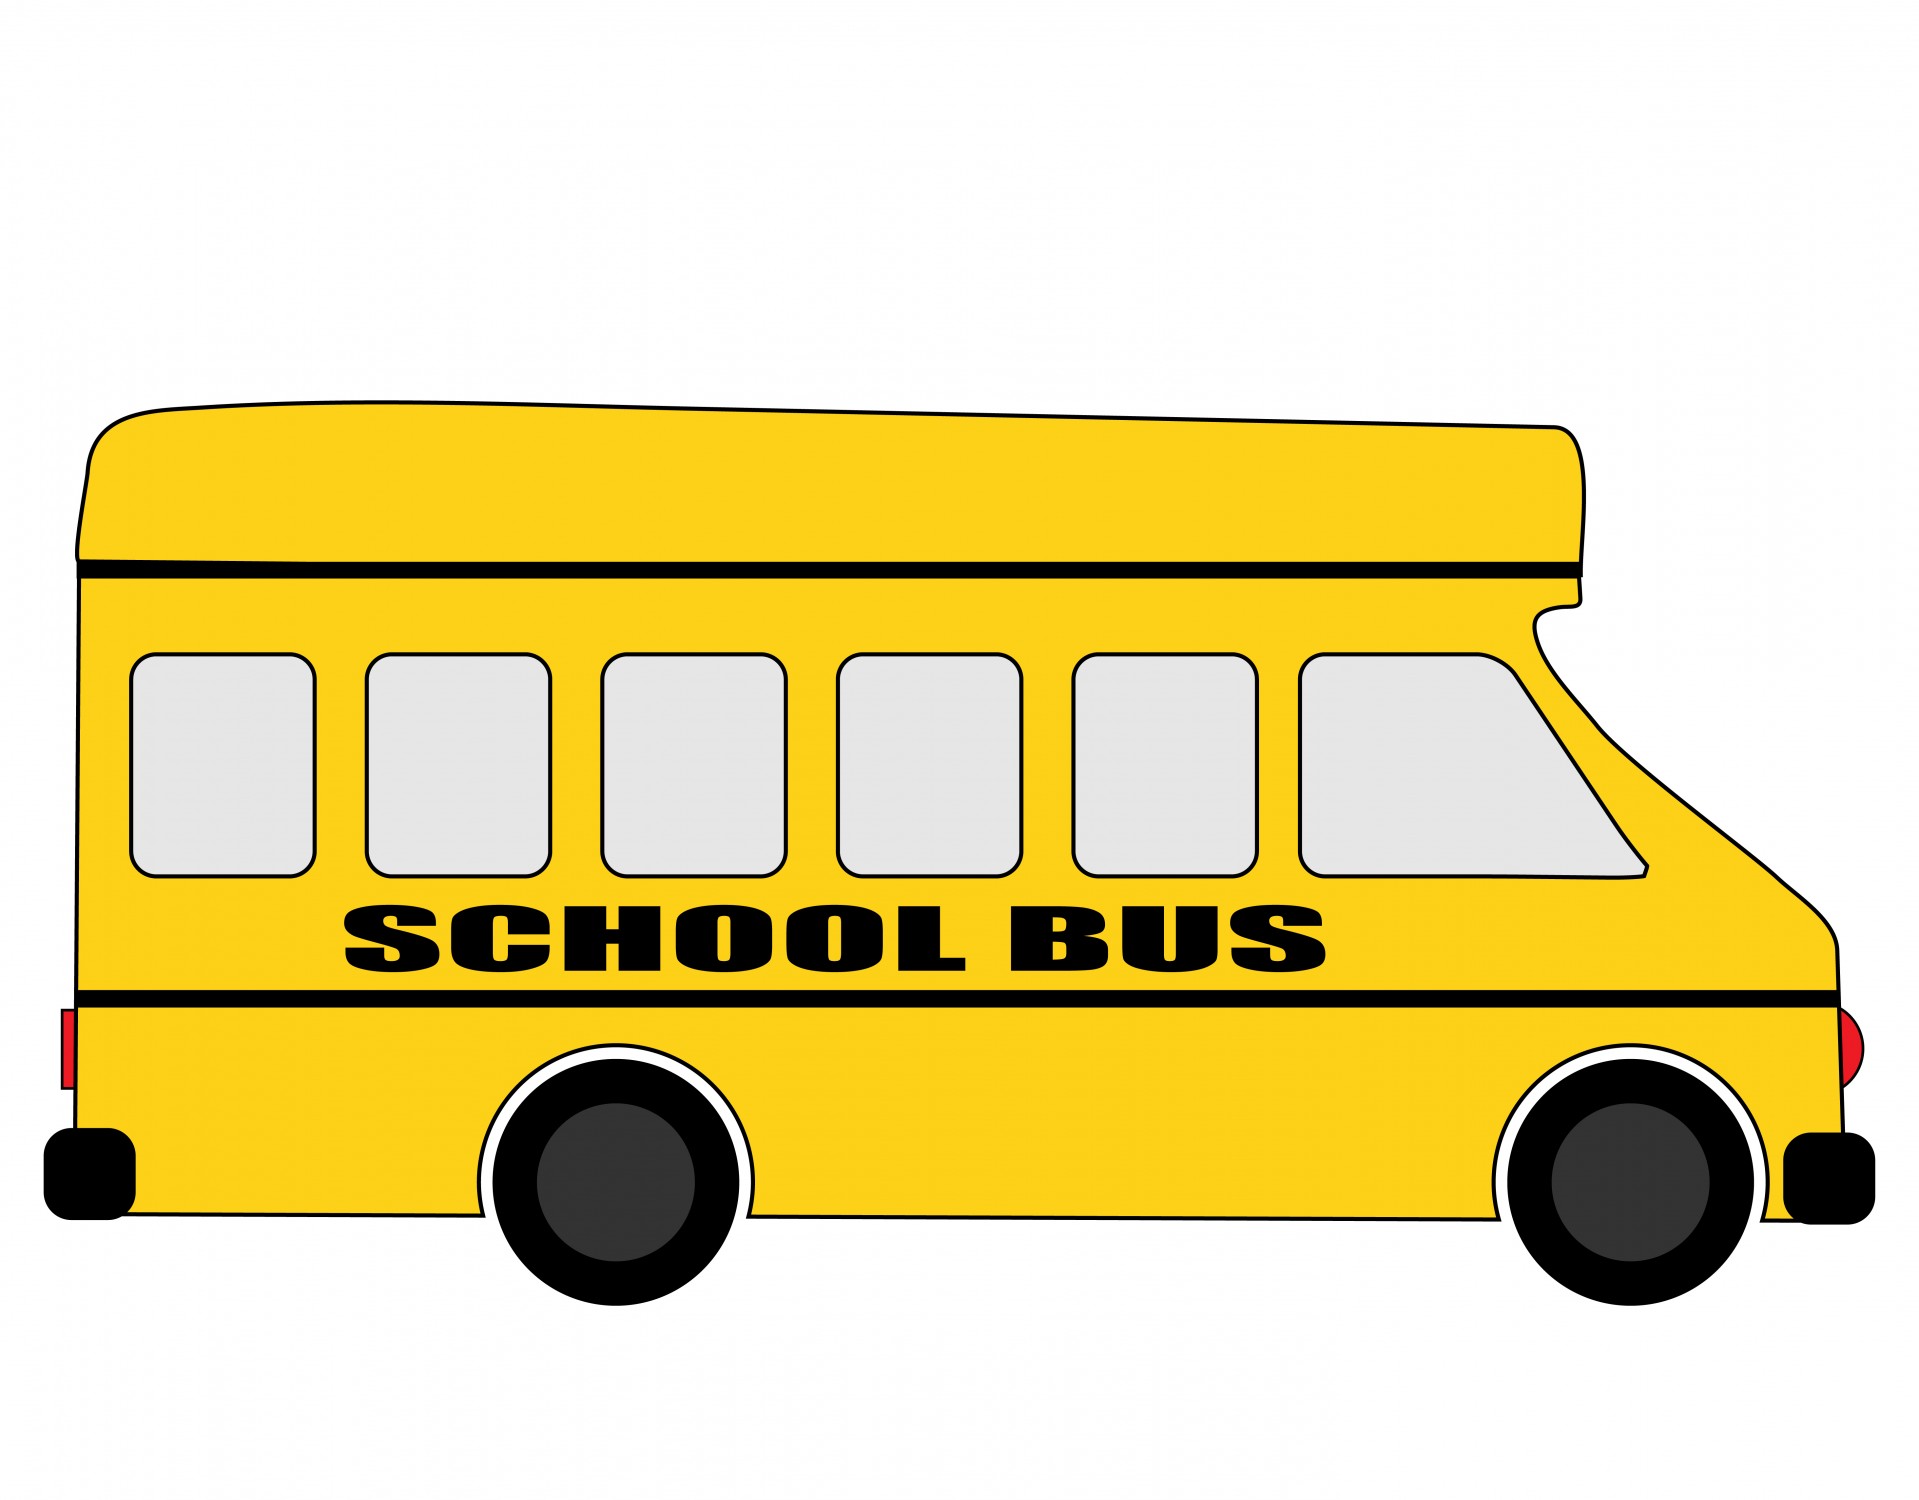 free clipart of school buses - photo #4